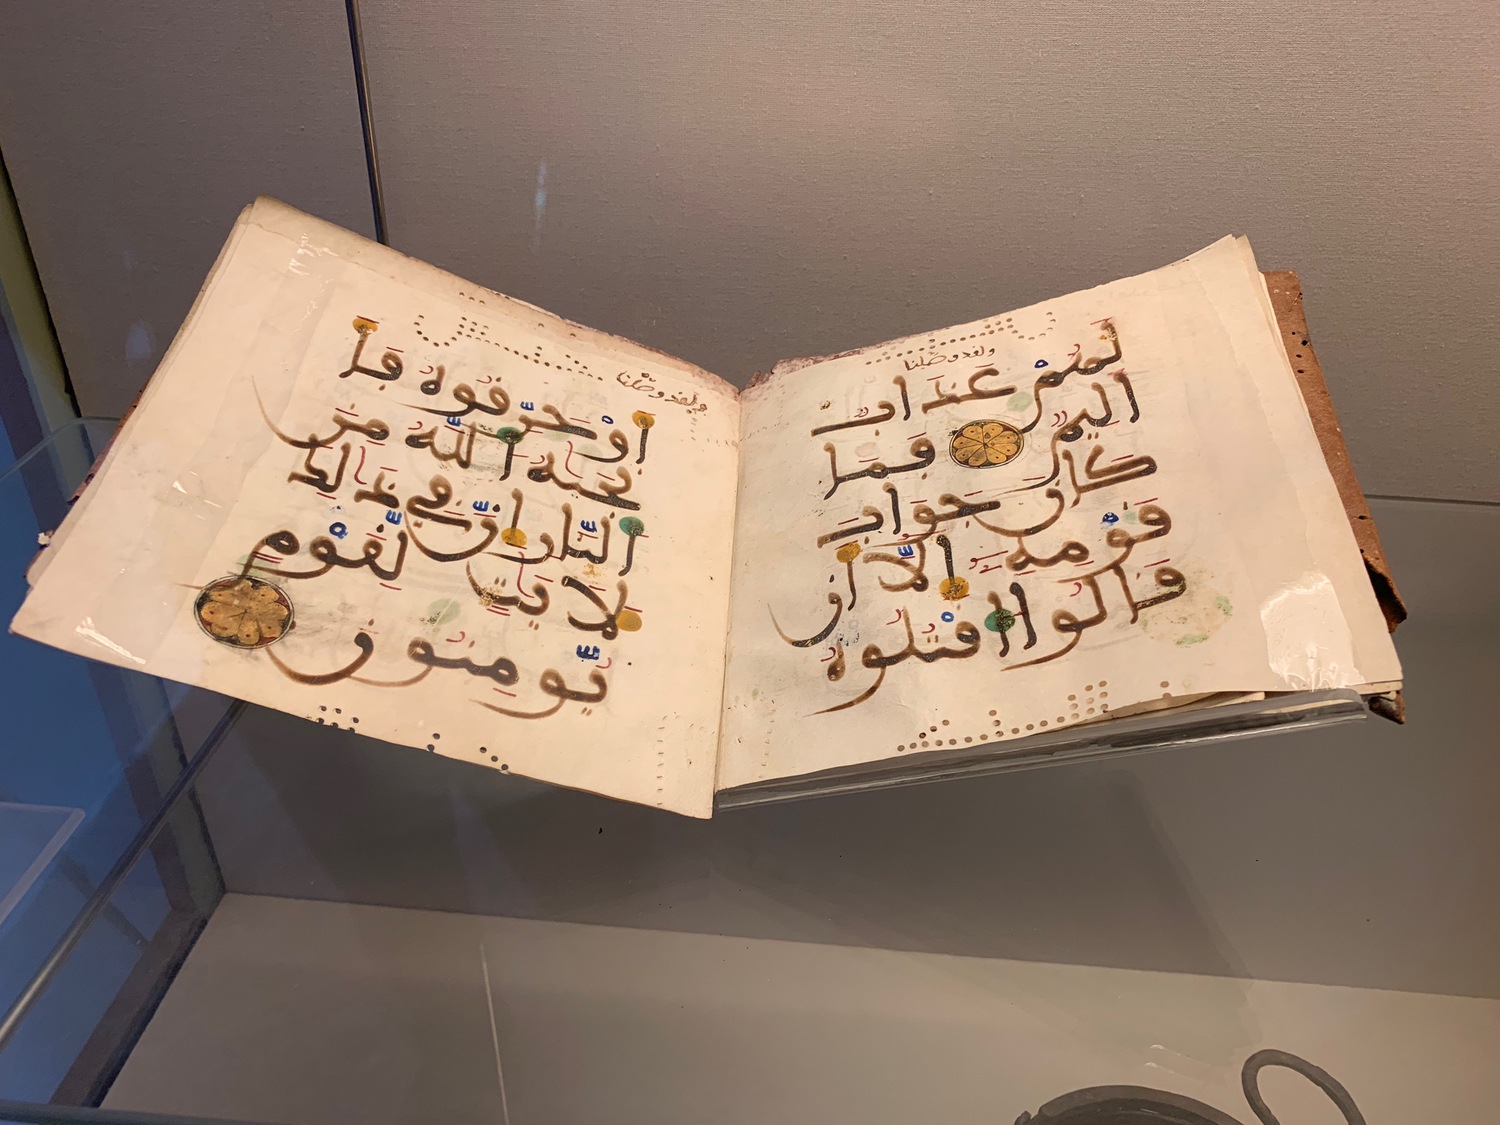 View of a Qur'an on display